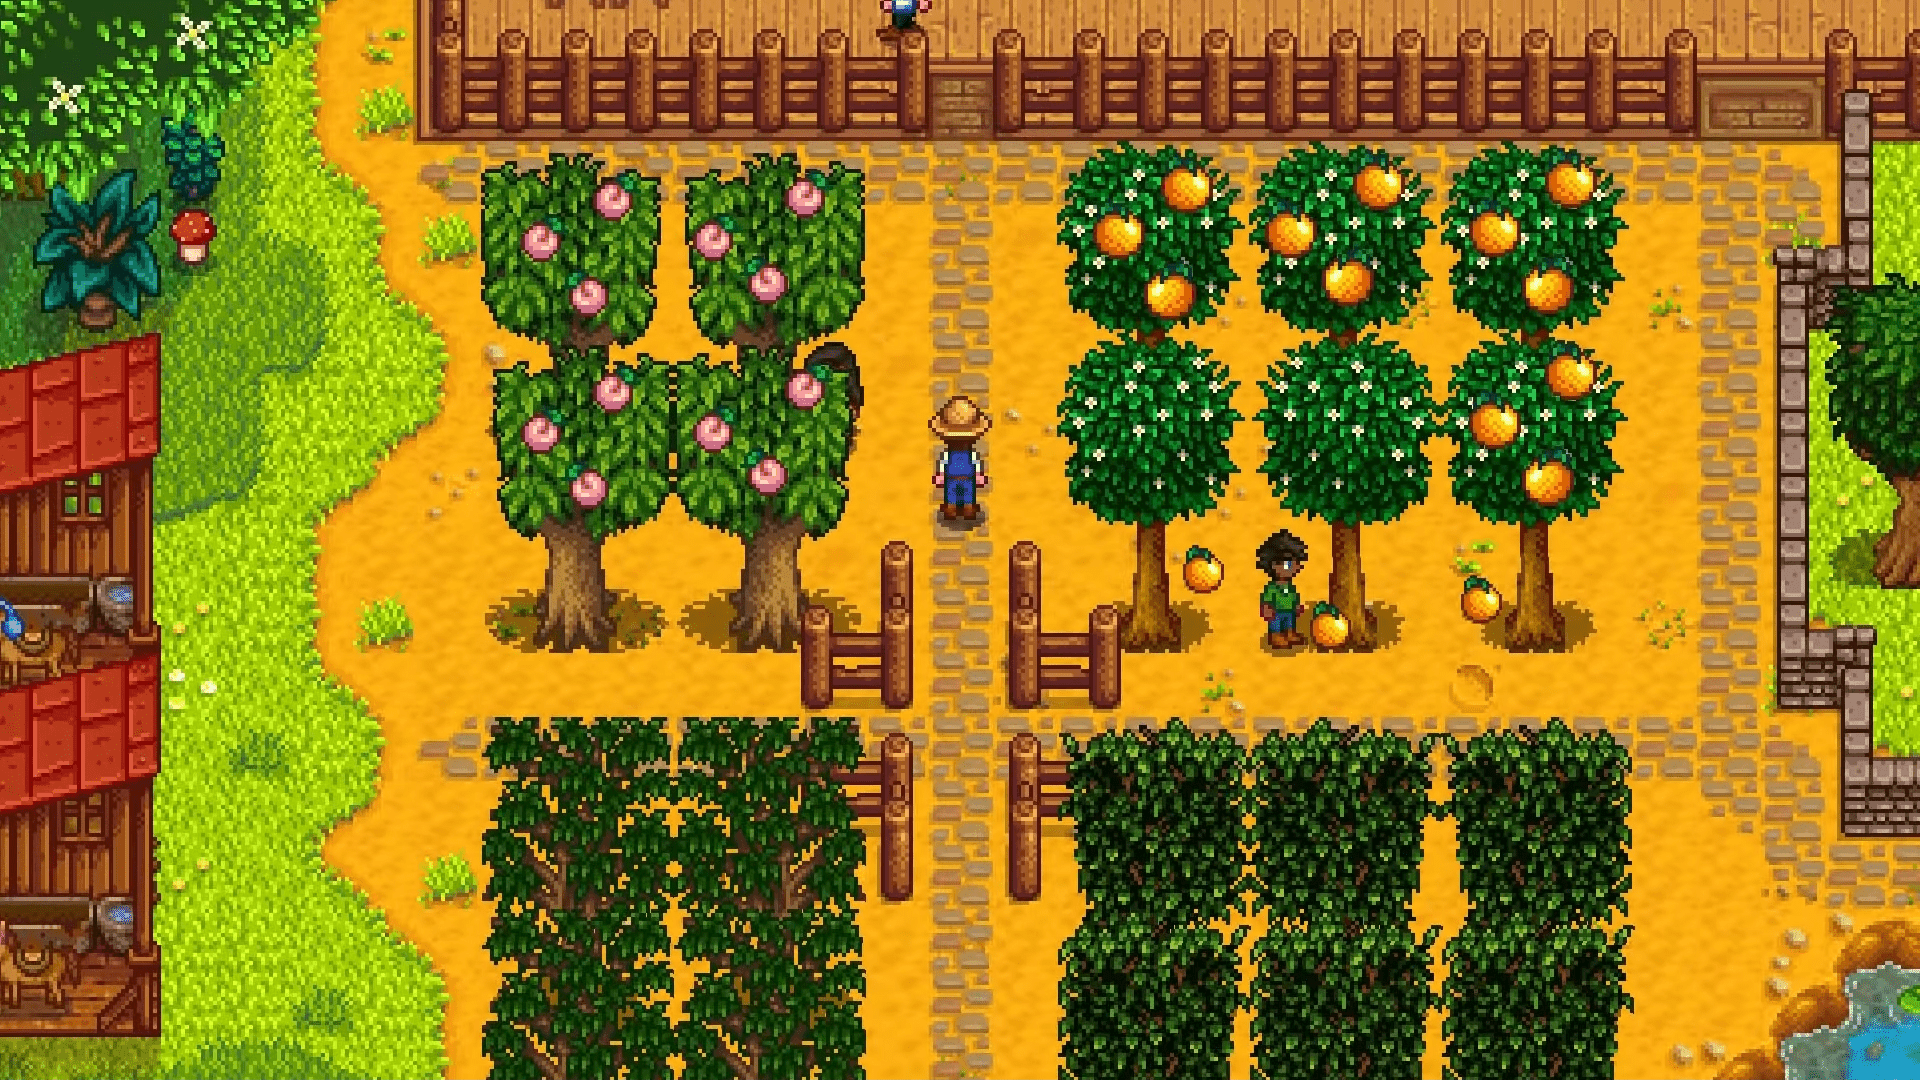 Stardew Valley’s Anticipated 1.4 Content Update Is Now Live, Hotfixes Being Pushed For Small Bugs